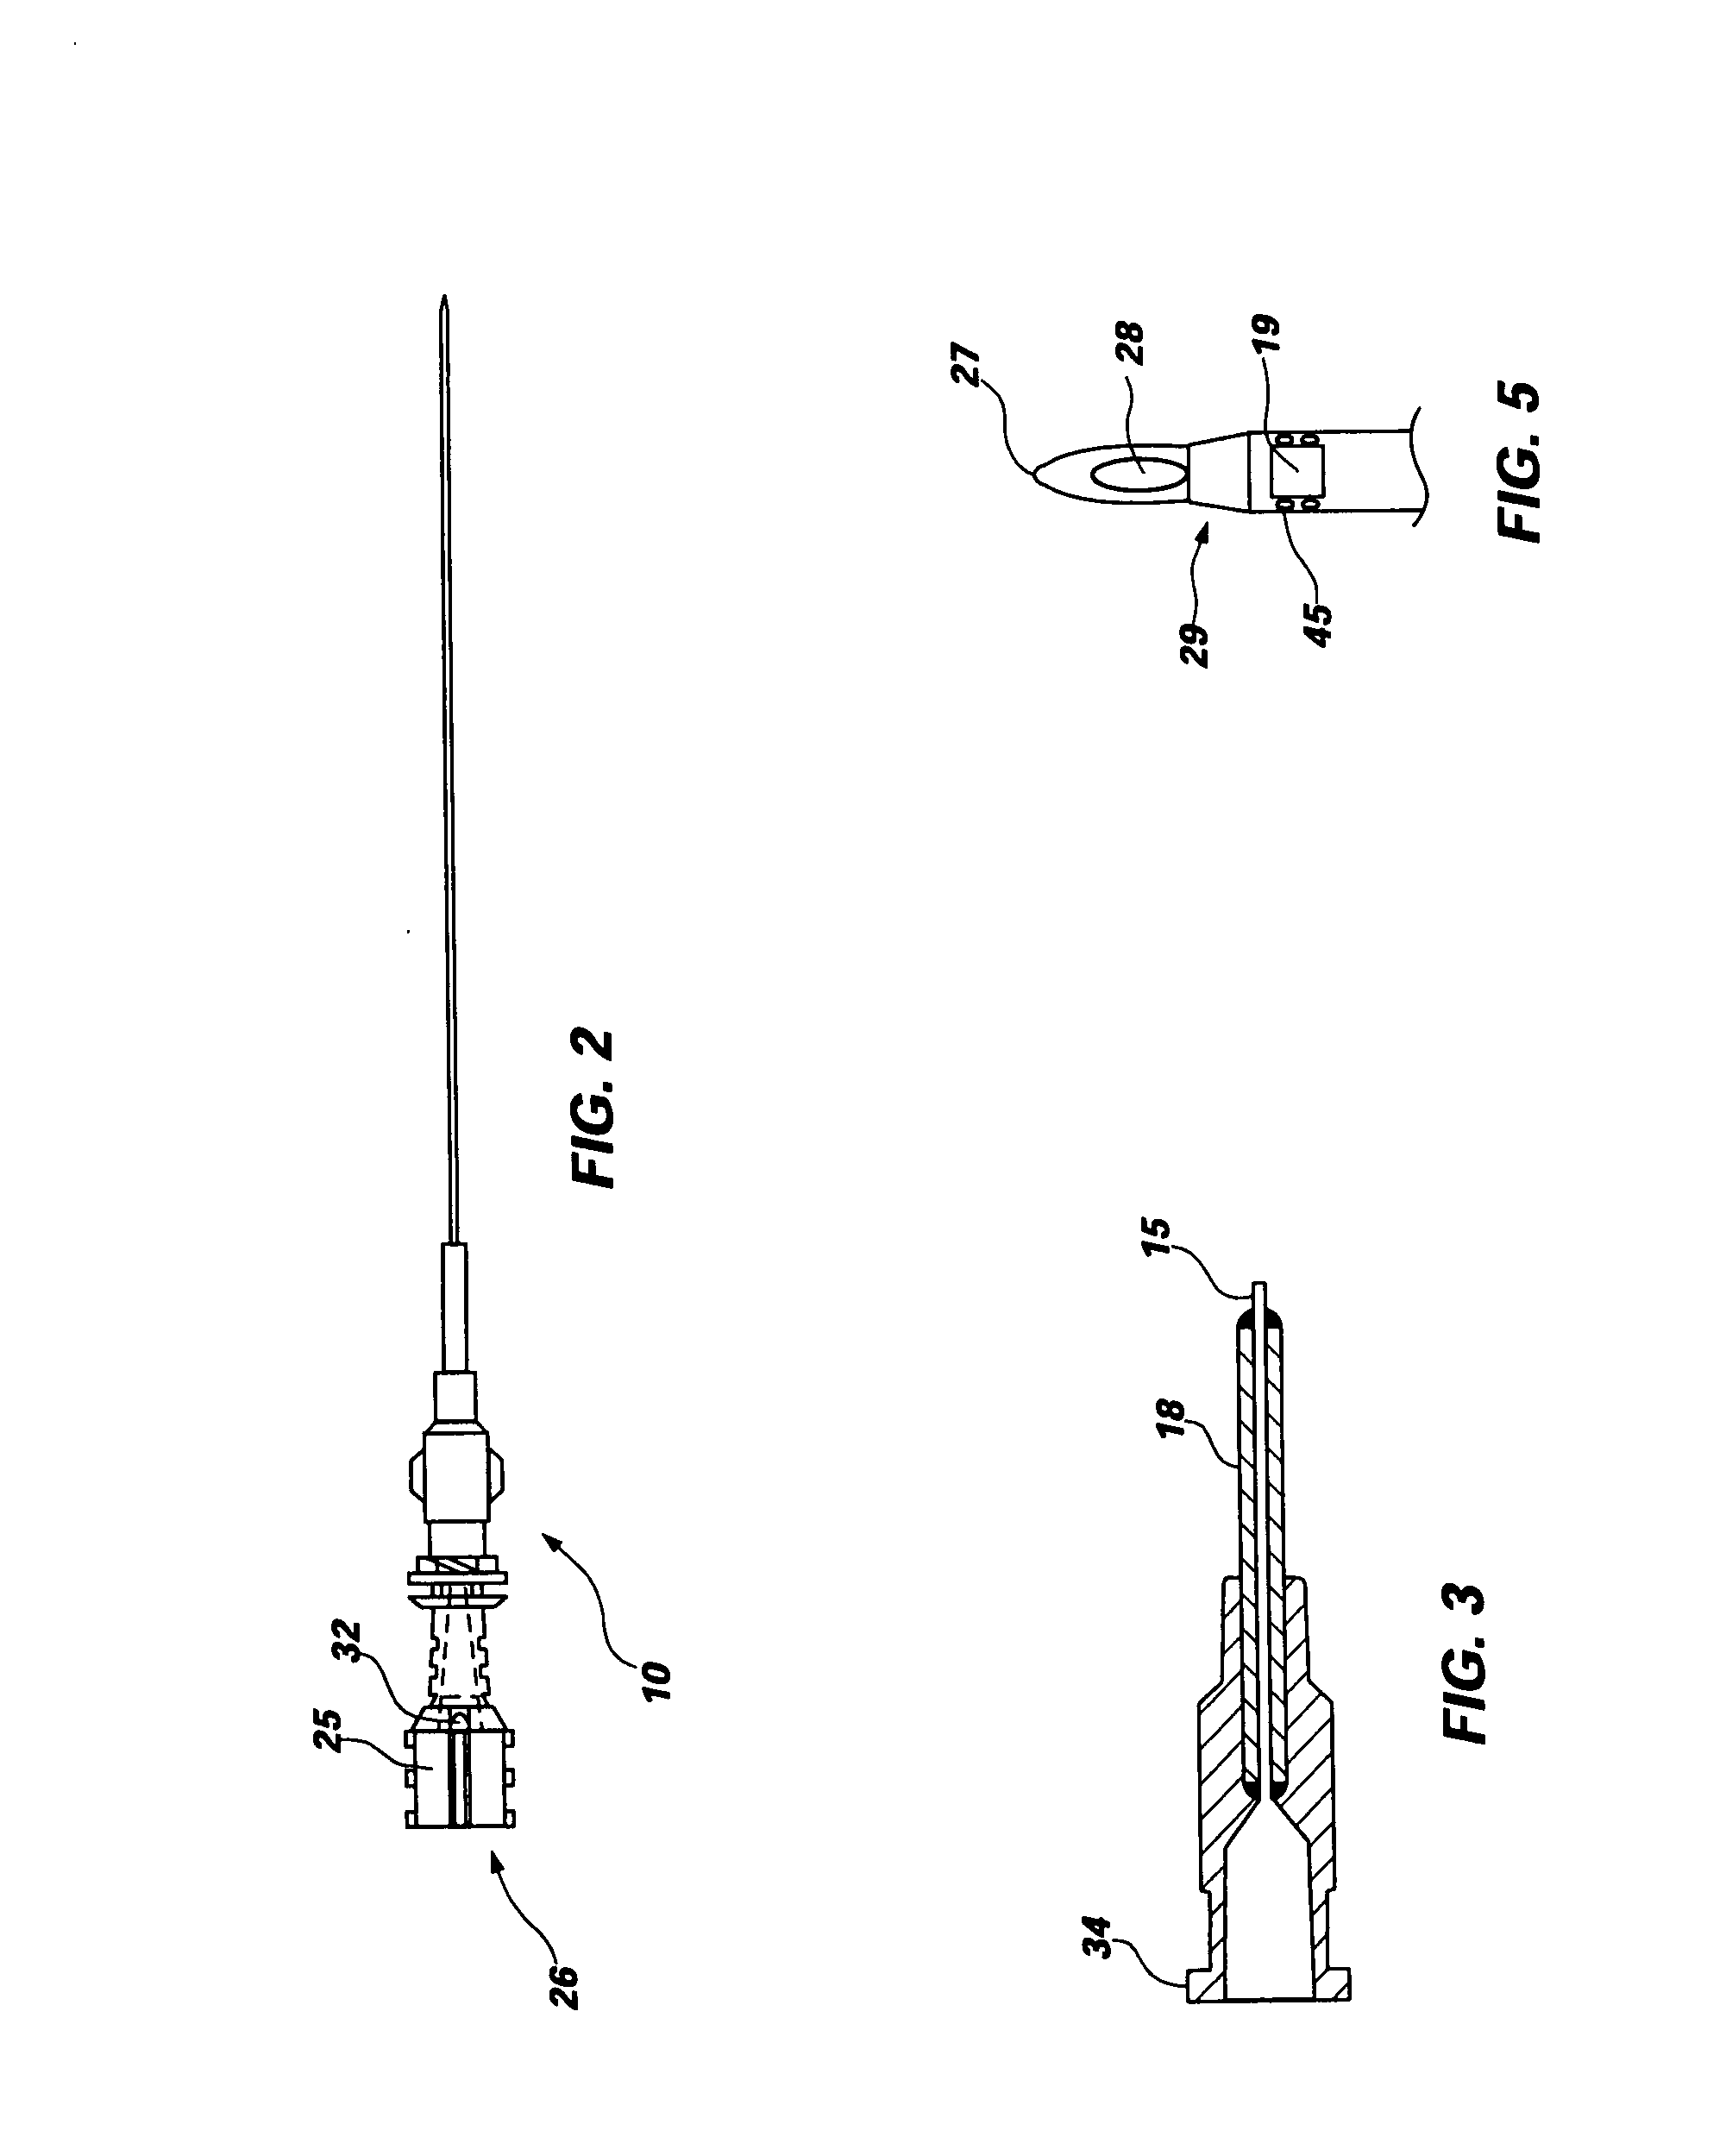 Method of using flexible spinal needle assemblies